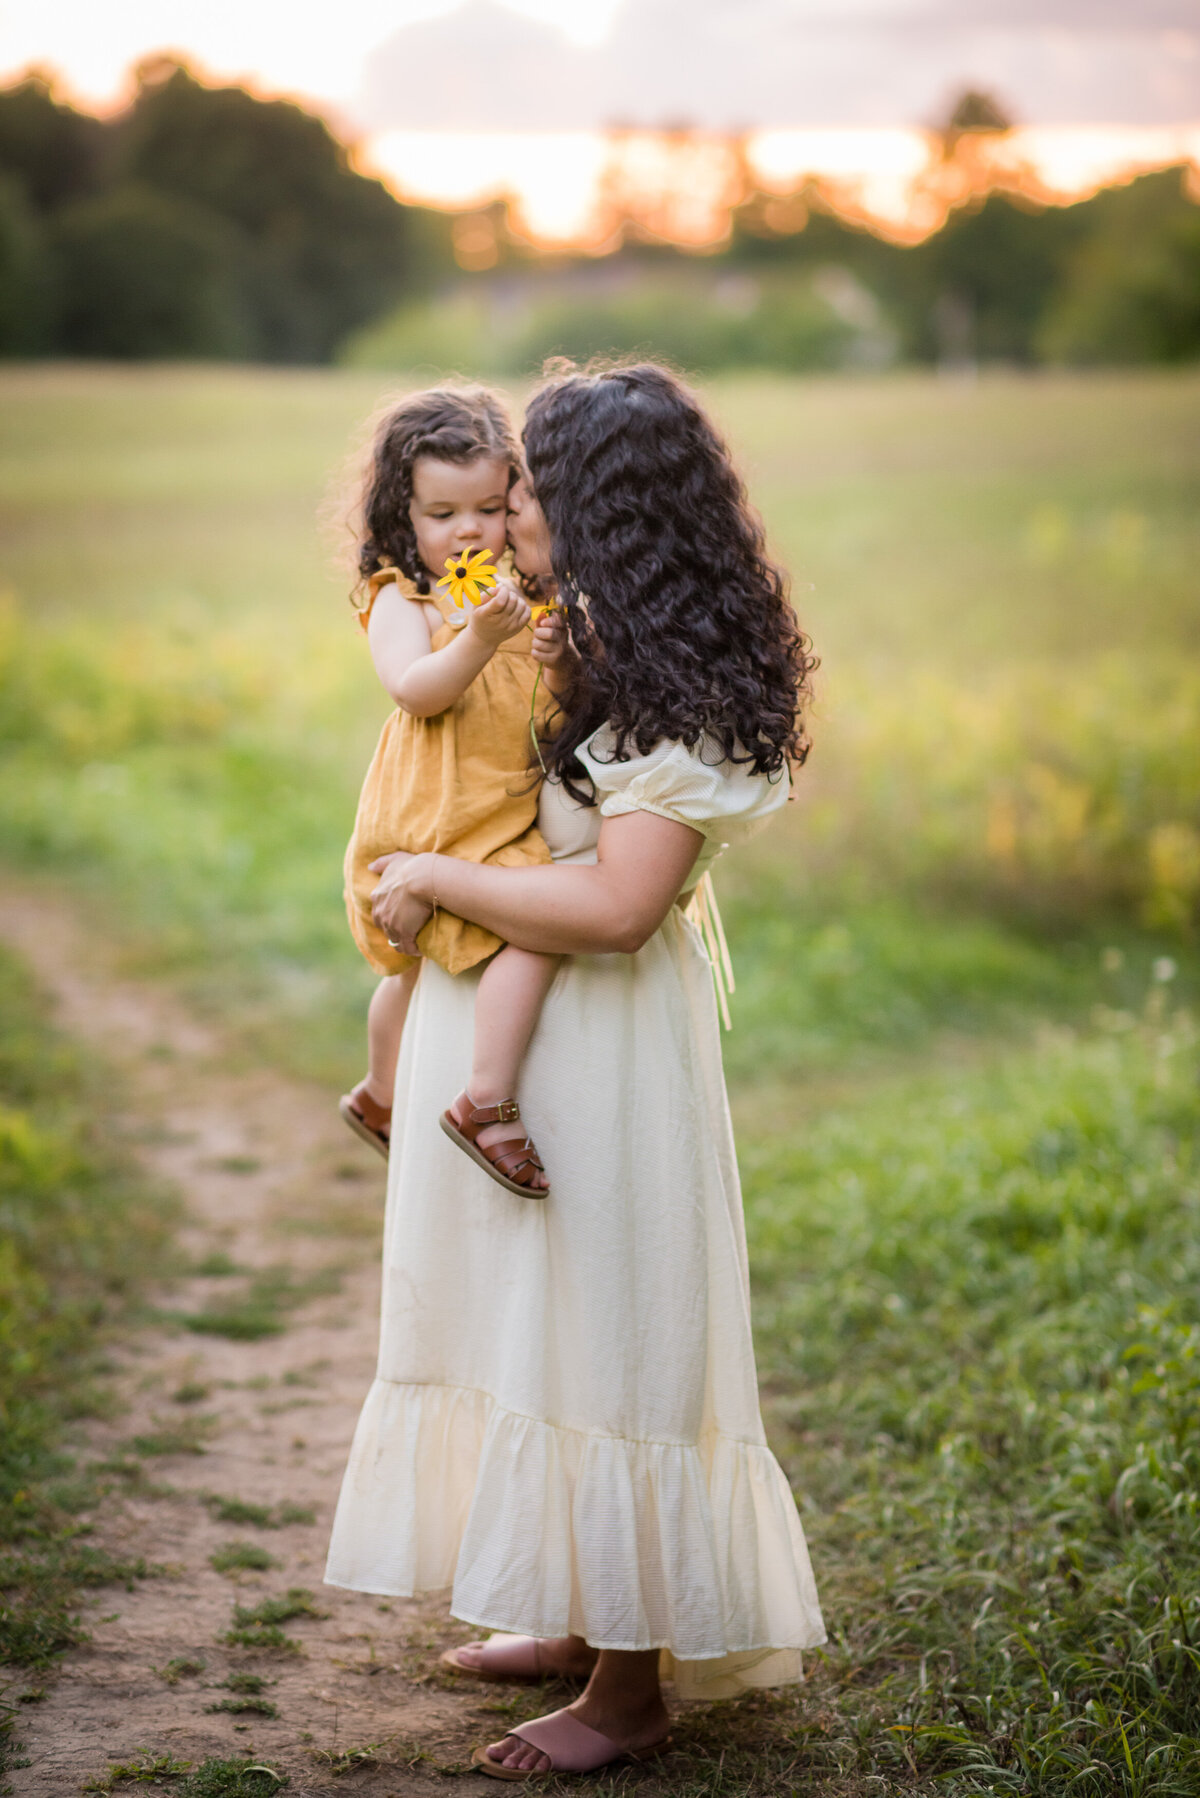 Boston-family-photographer-bella-wang-photography-Lifestyle-session-outdoor-wildflower-108